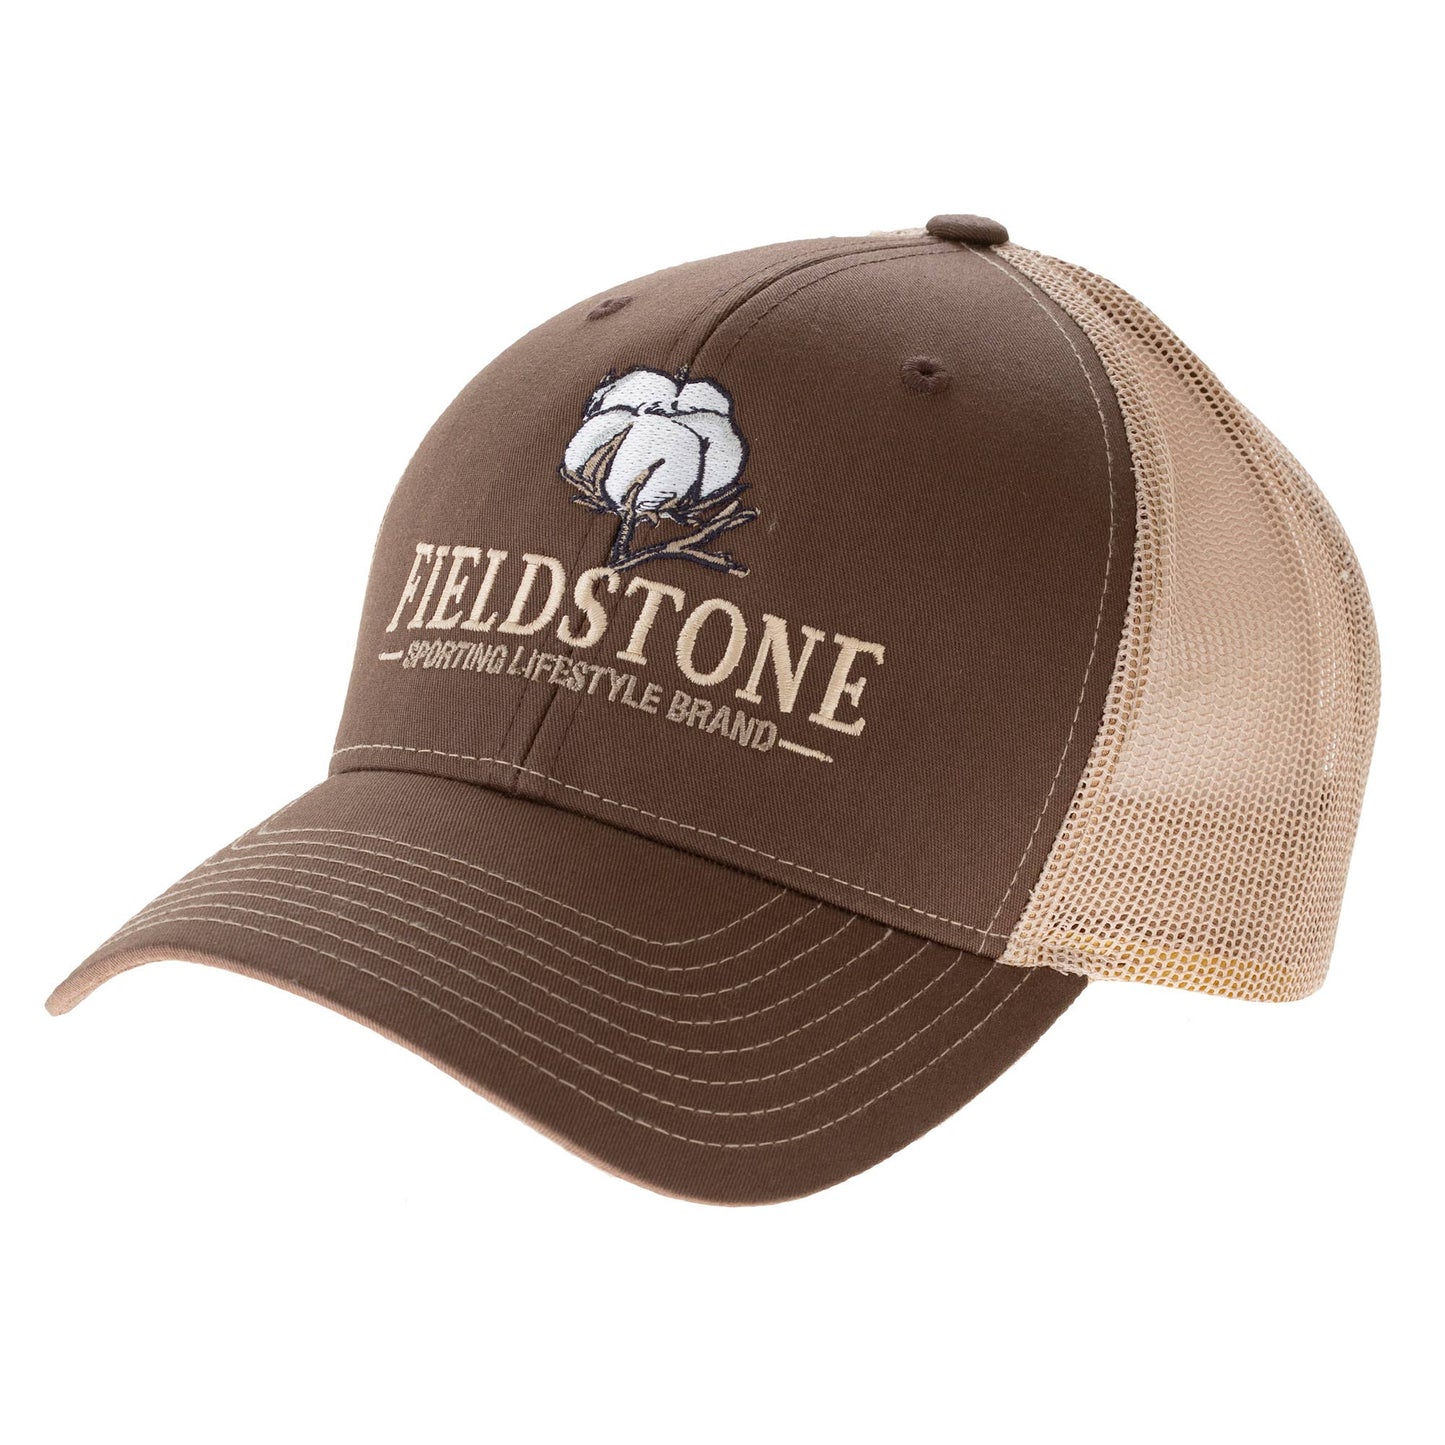 Fieldstone Outdoor Provisions Co. - Hat